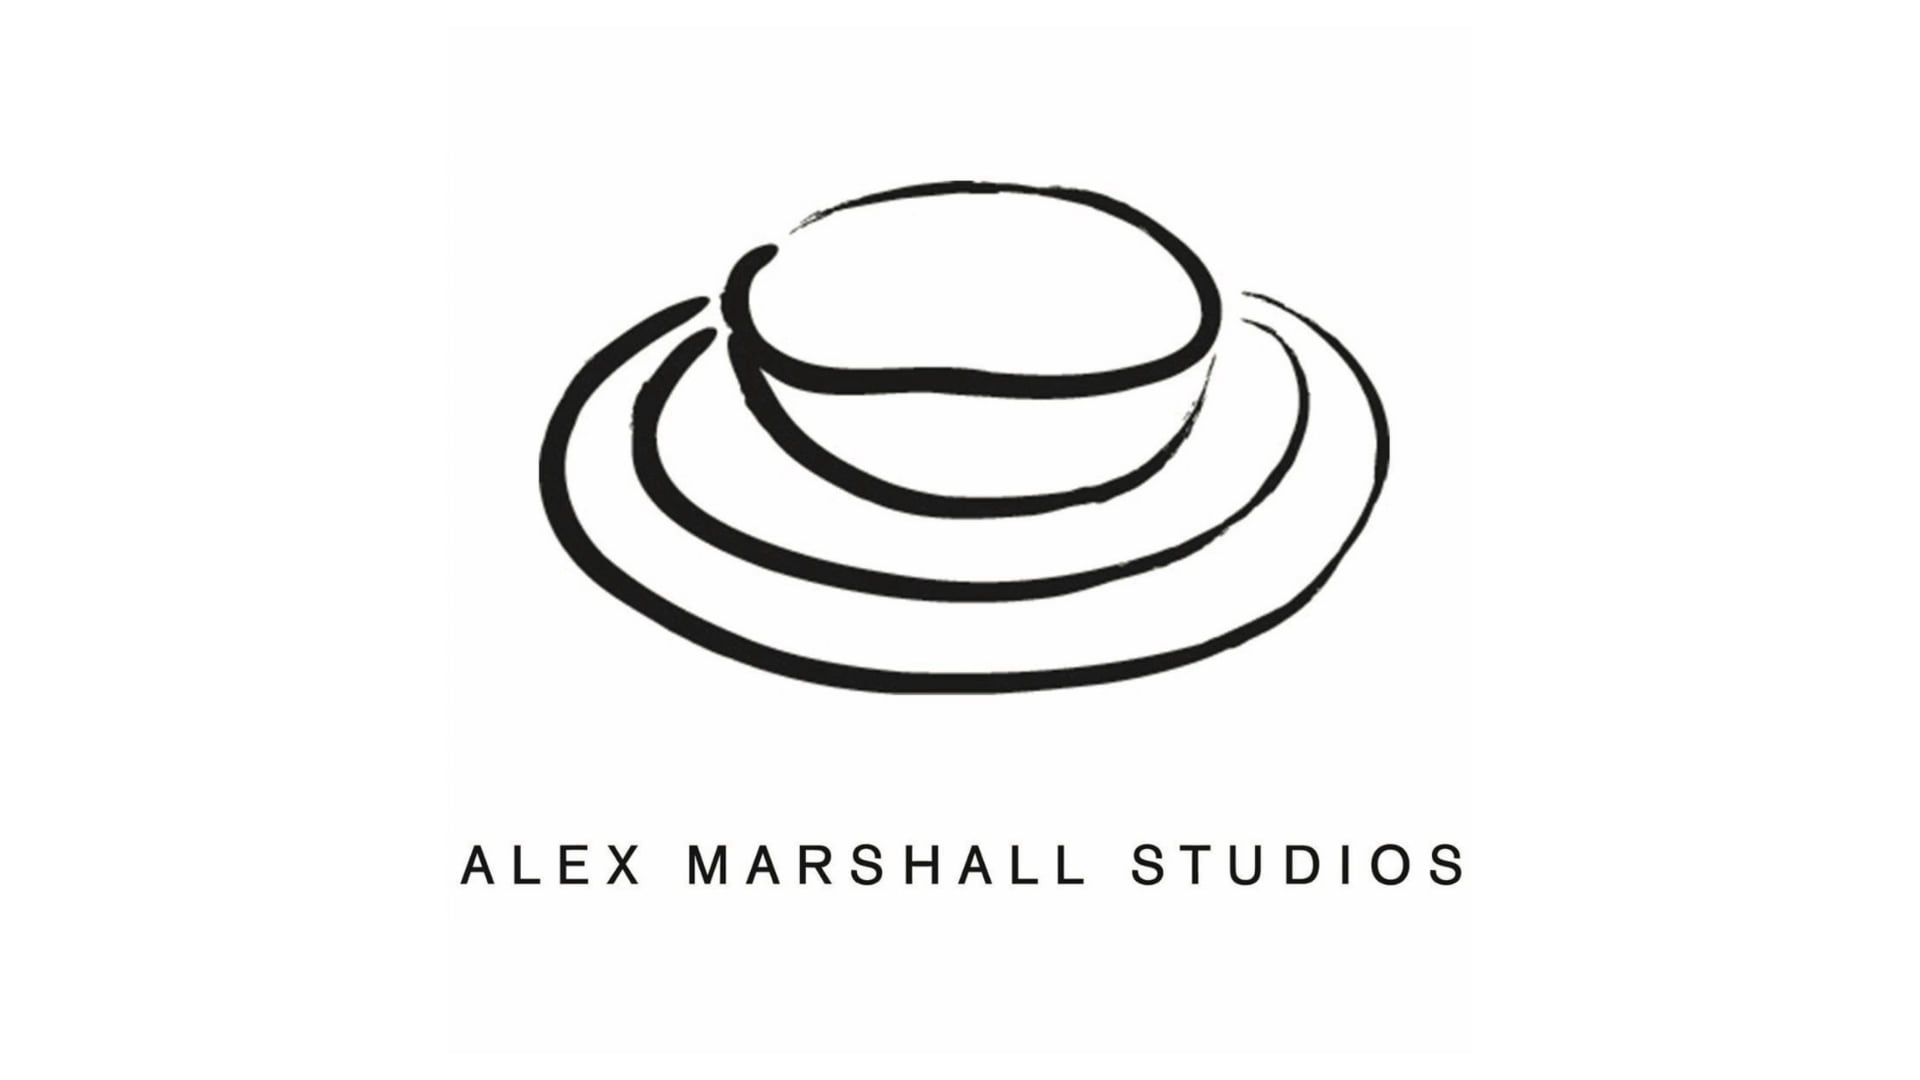 Alex Marshall Studios | From Our Hands to Yours